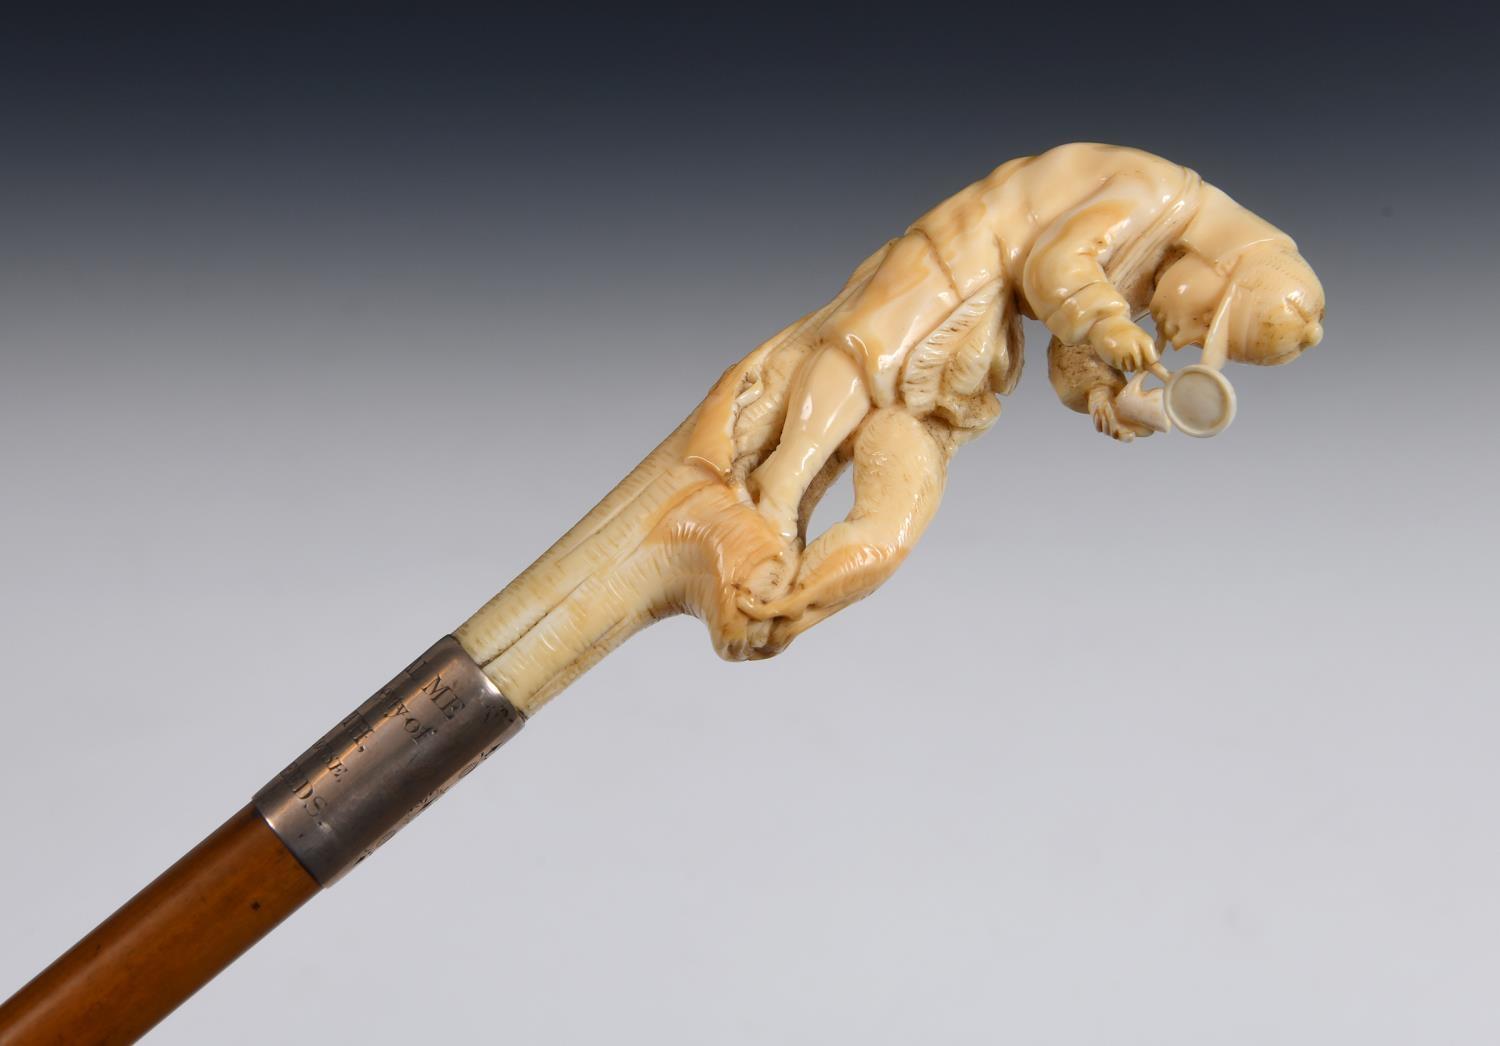 A 19th century walking stick, with a carved ivory handle depicting Sherlock Holmes with a